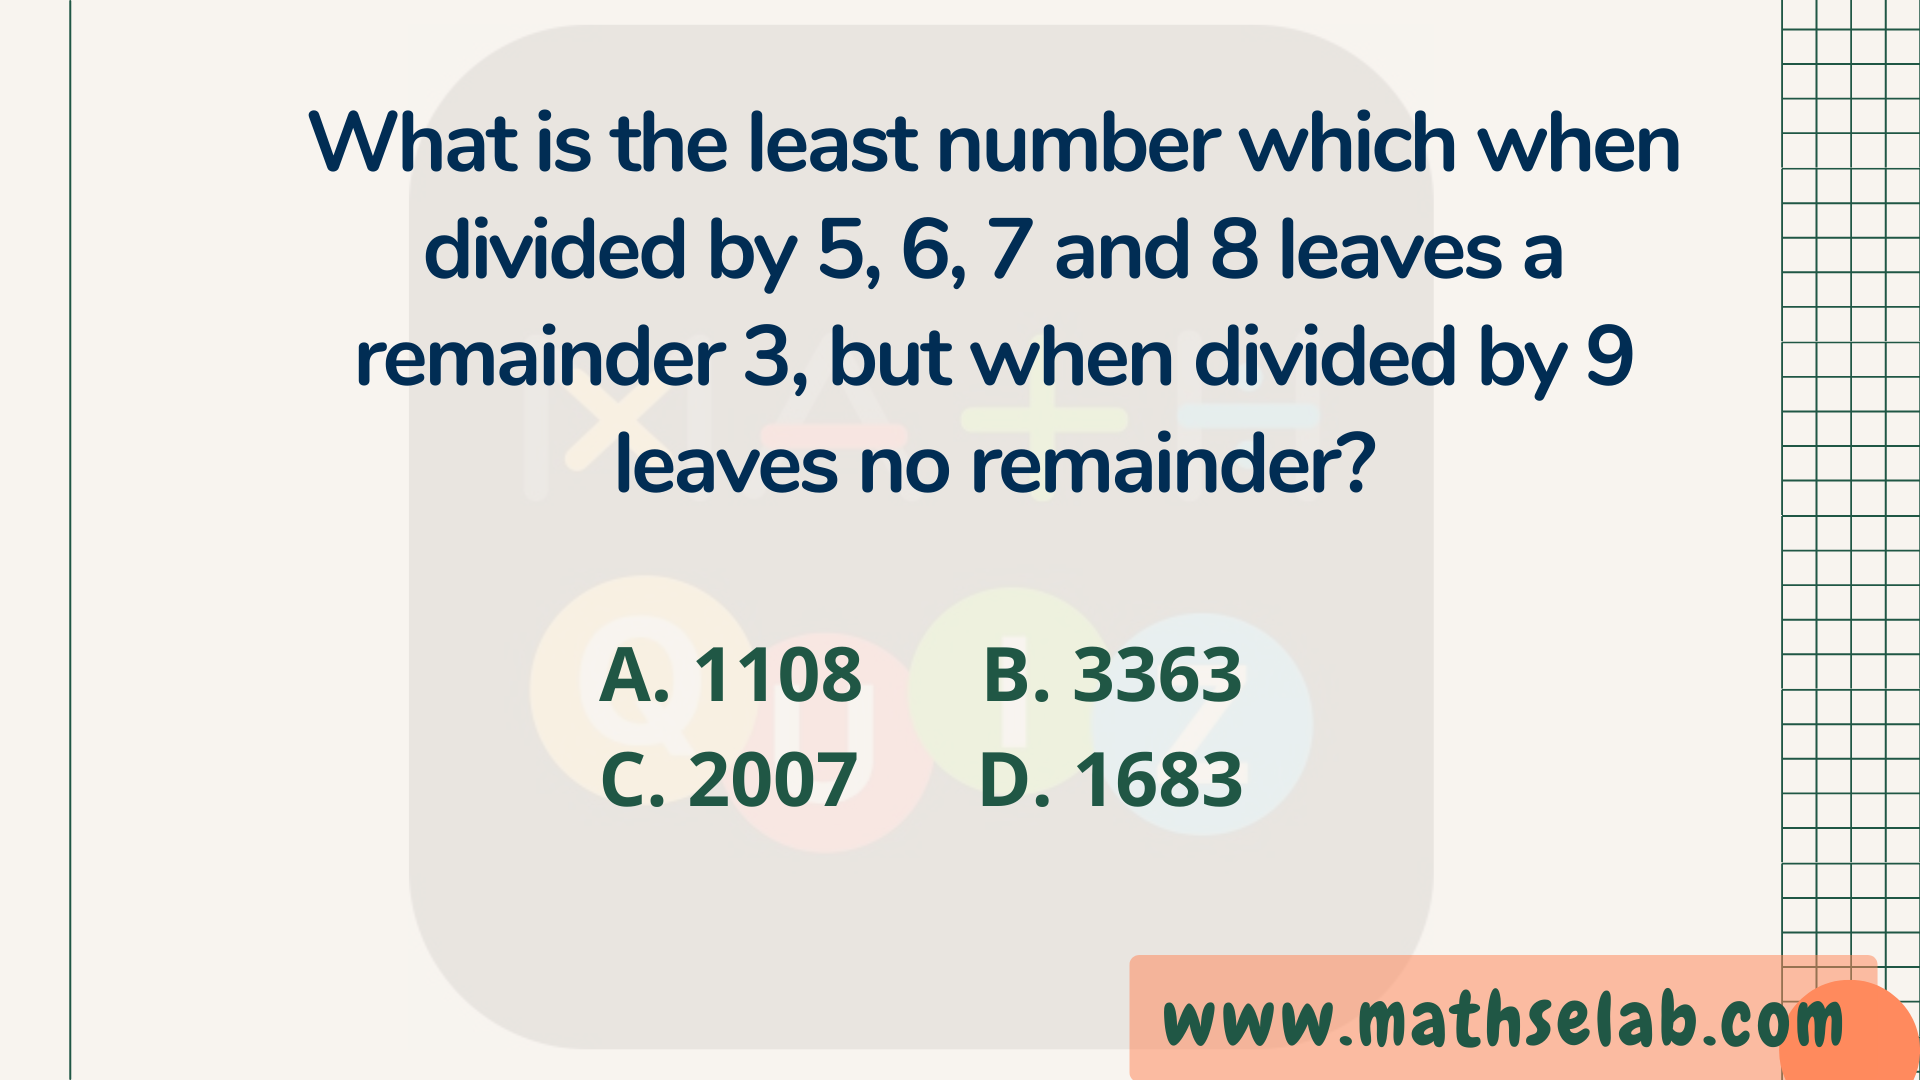 What is the least number which when divided by 5, 6, 7 and 8 leaves a remainder 3, but when divided by 9 leaves no remainder - www.mathselab.com